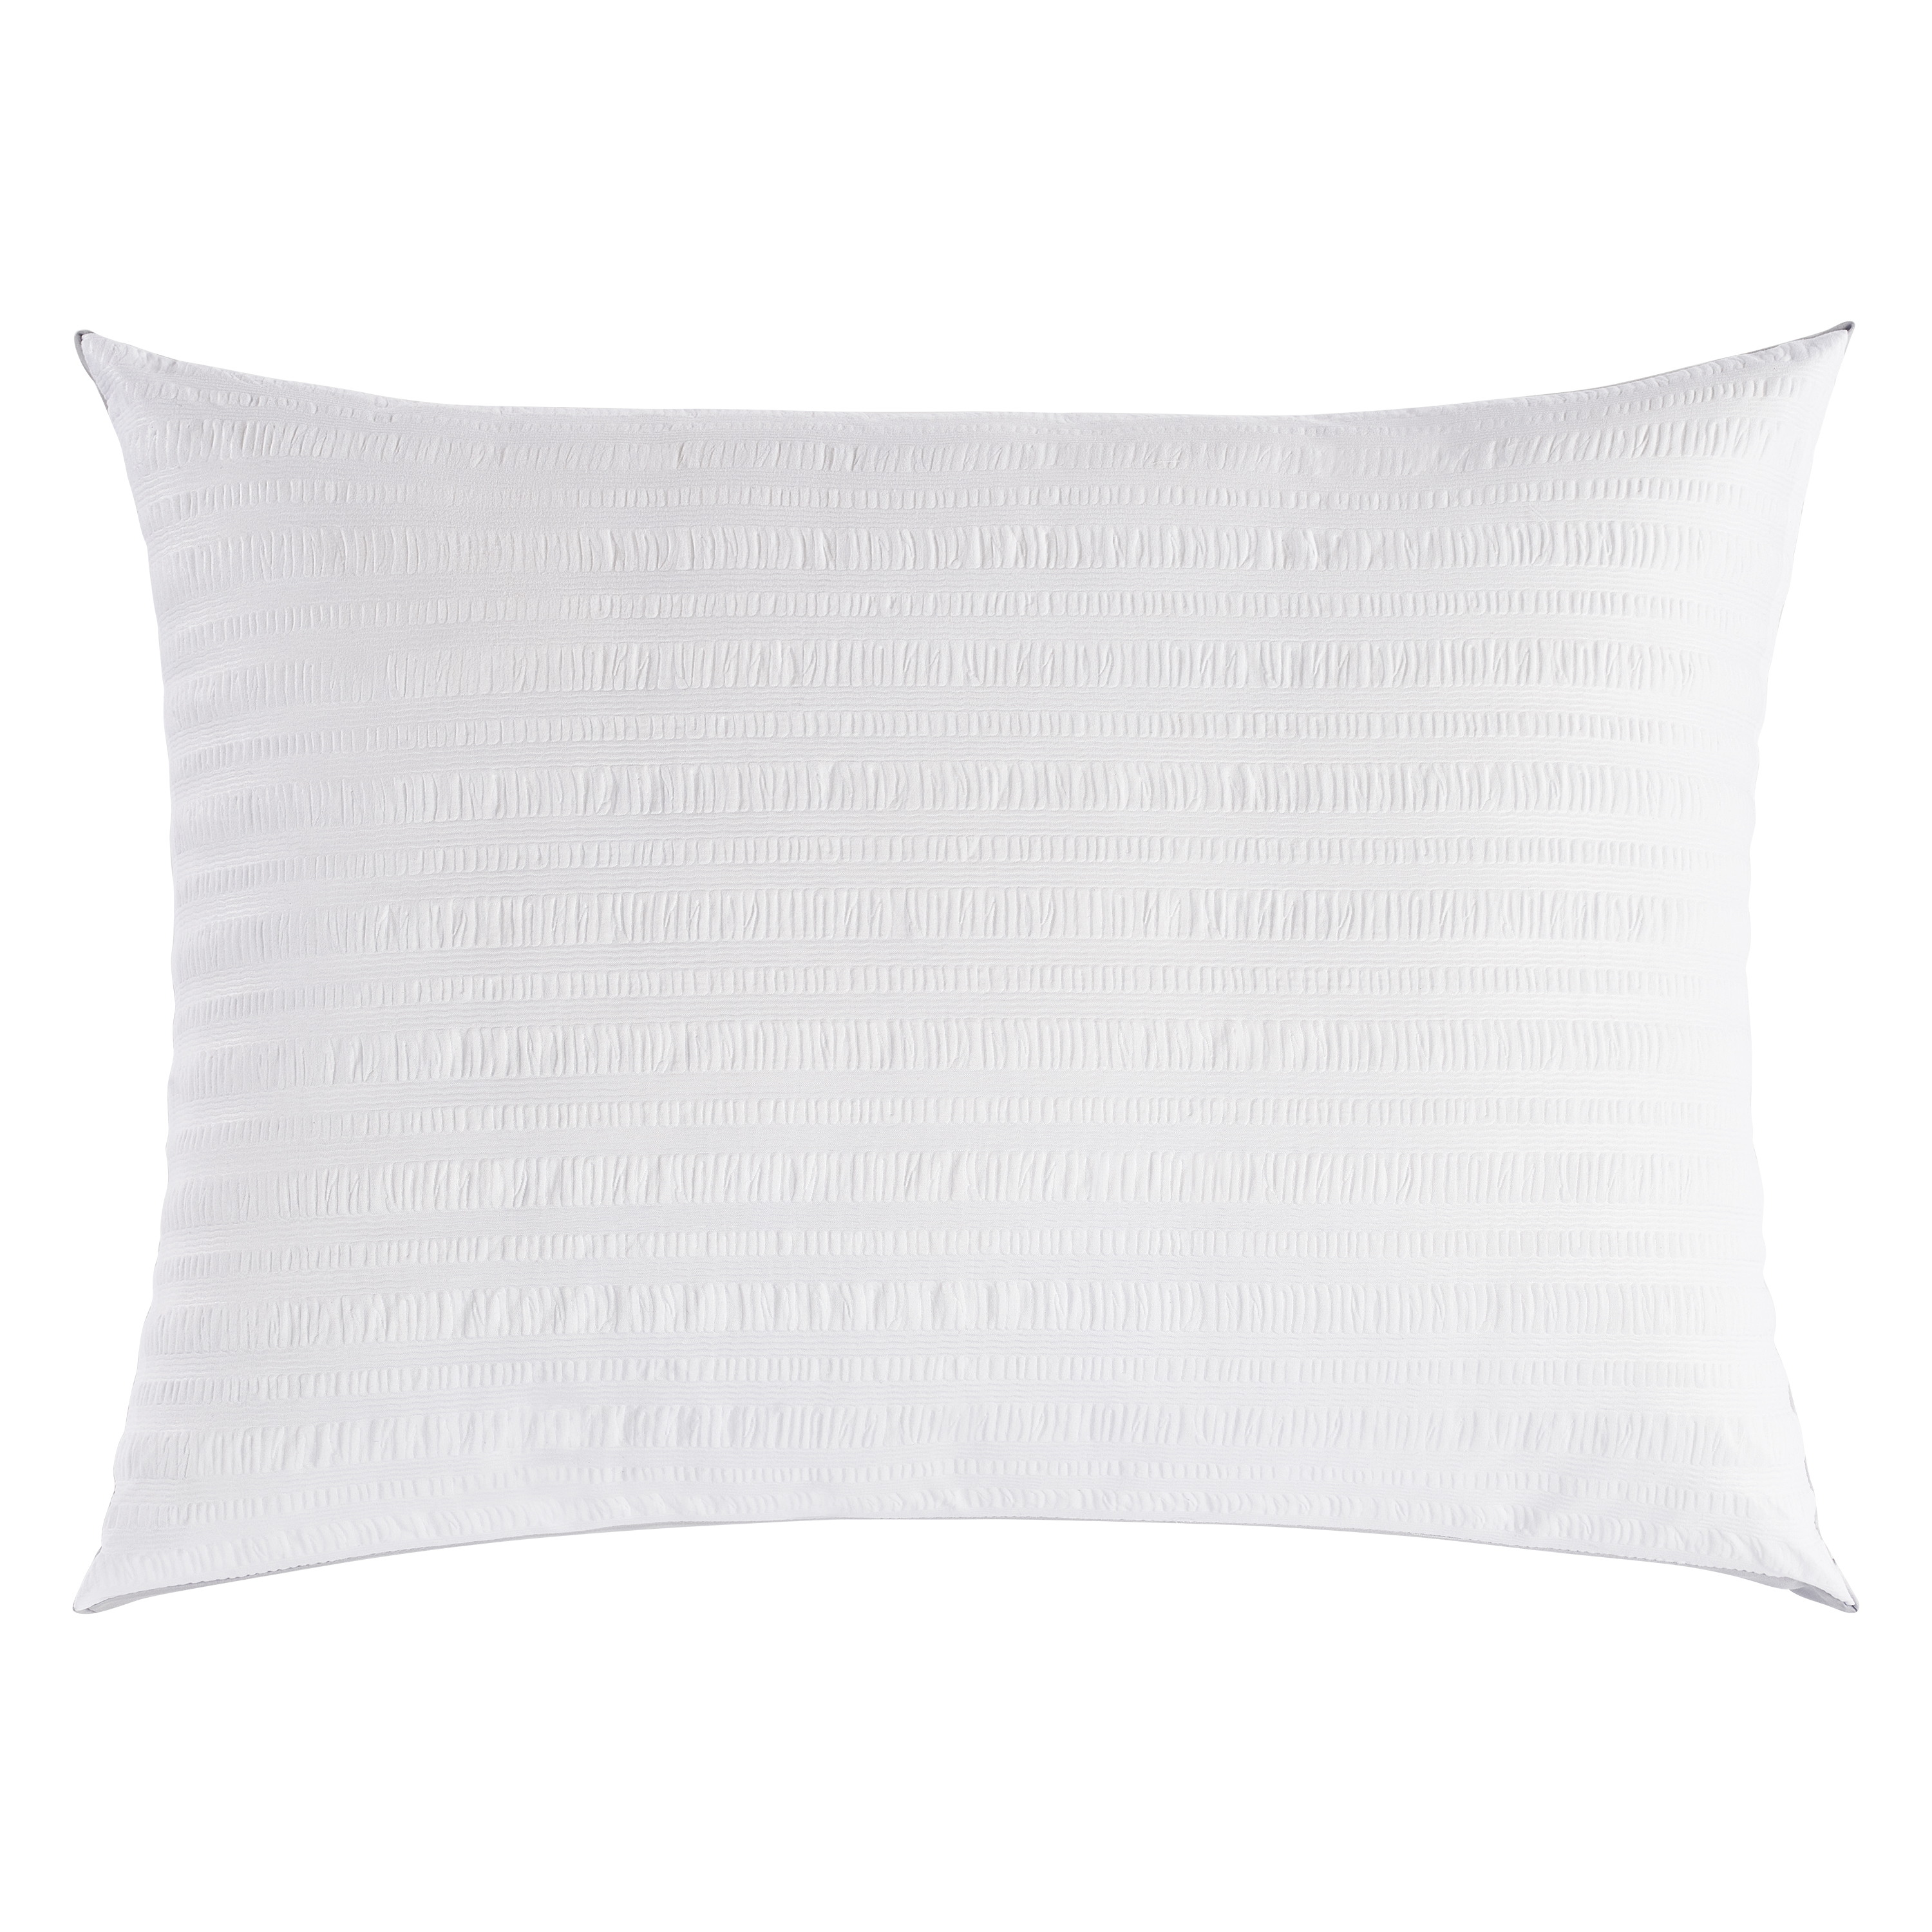 SertaPedic Dreamloft Bed Pillow, Polyester Fill, All Ages, Standard Size (20"x26") - image 2 of 6